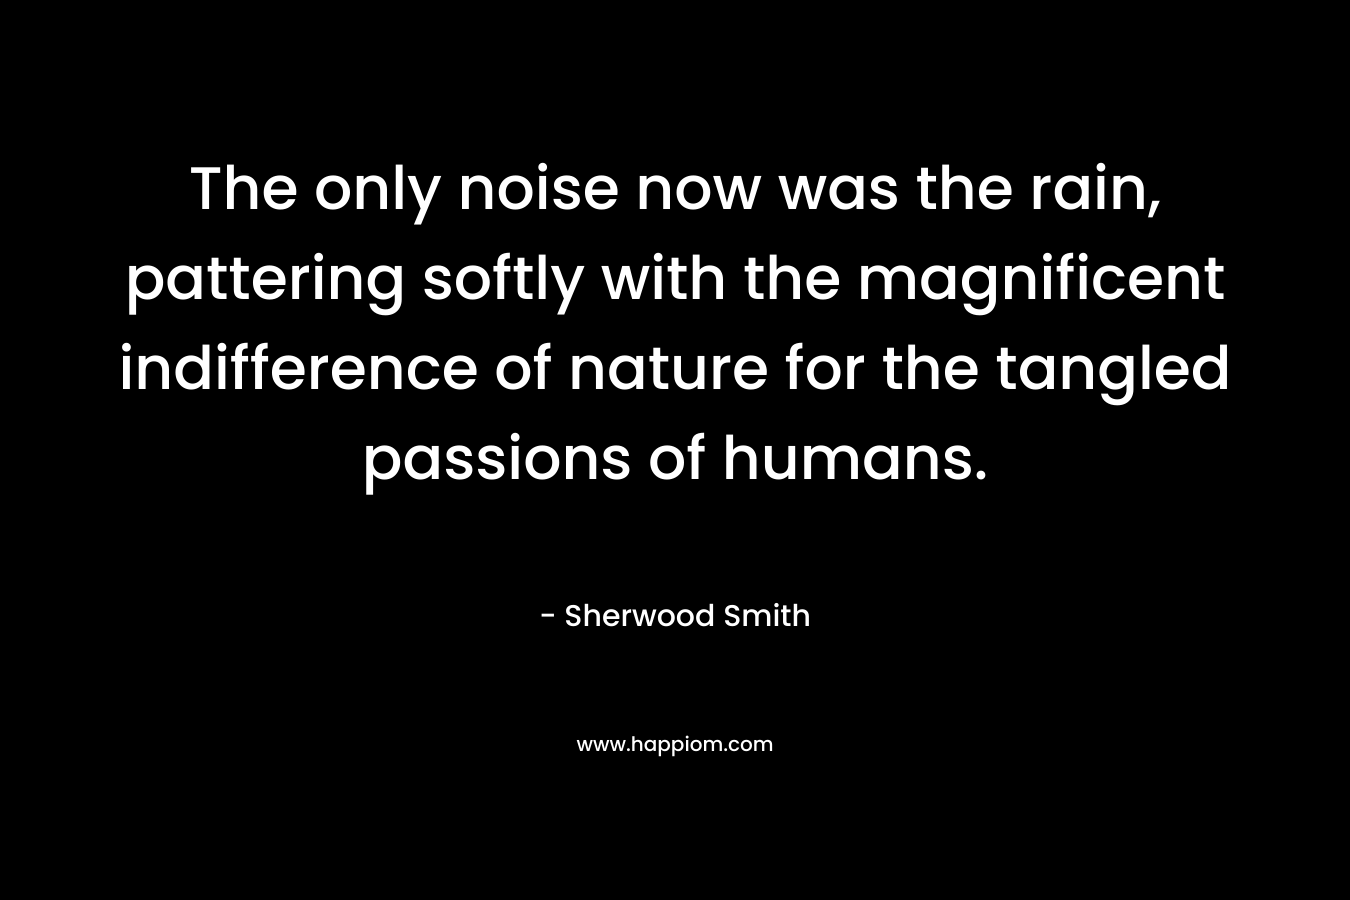 The only noise now was the rain, pattering softly with the magnificent indifference of nature for the tangled passions of humans. – Sherwood Smith